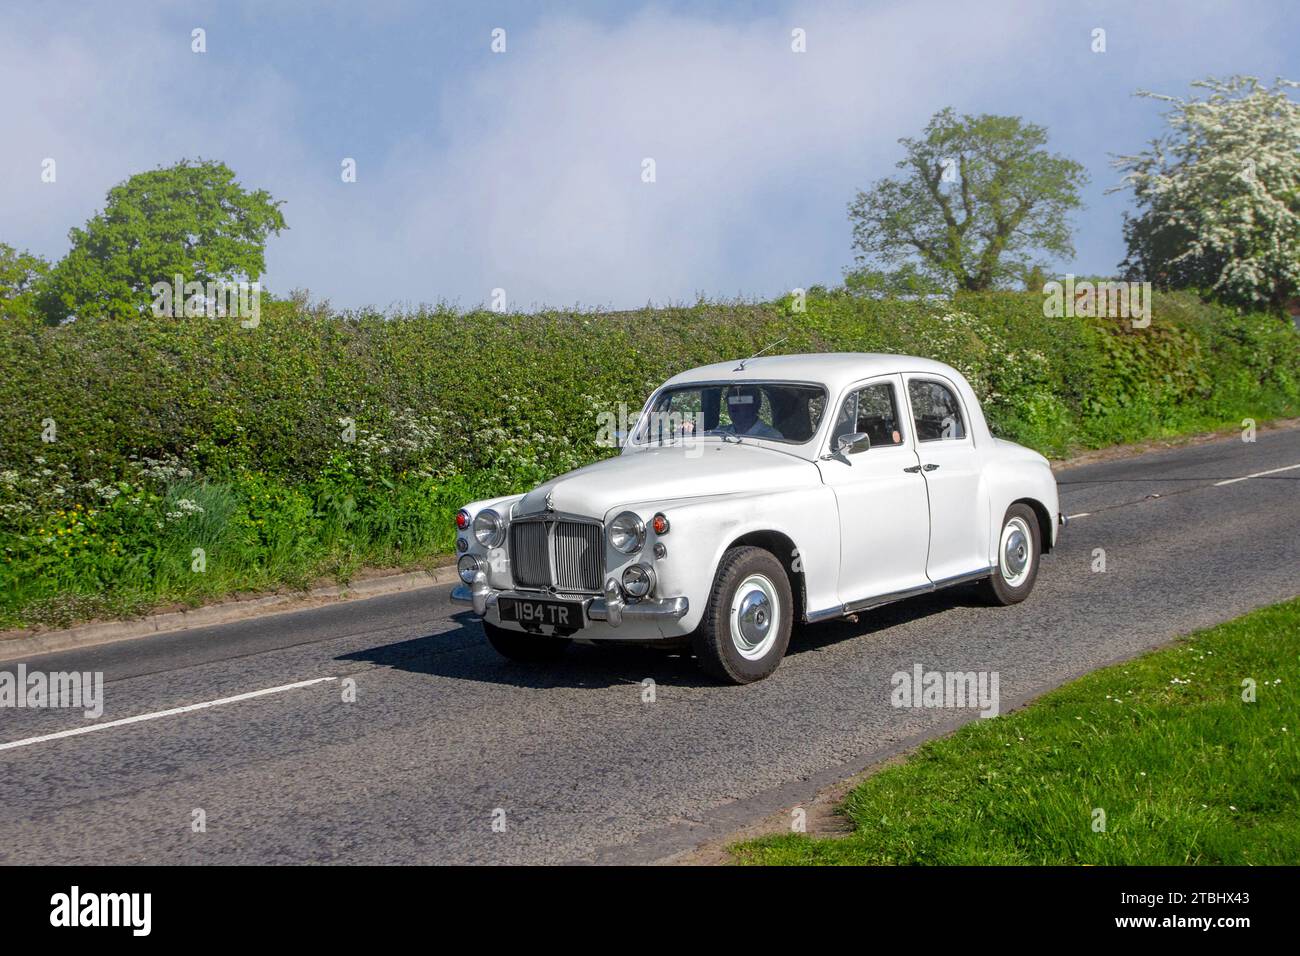 1960 60s sixties White Rover 80 2495cc petrol four door saloon car. Rover P4 series  mid-size luxury saloon cars; Vintage, restored classic motors, automobile collectors motoring enthusiasts, historic veteran cars travelling in Cheshire, UK Stock Photo